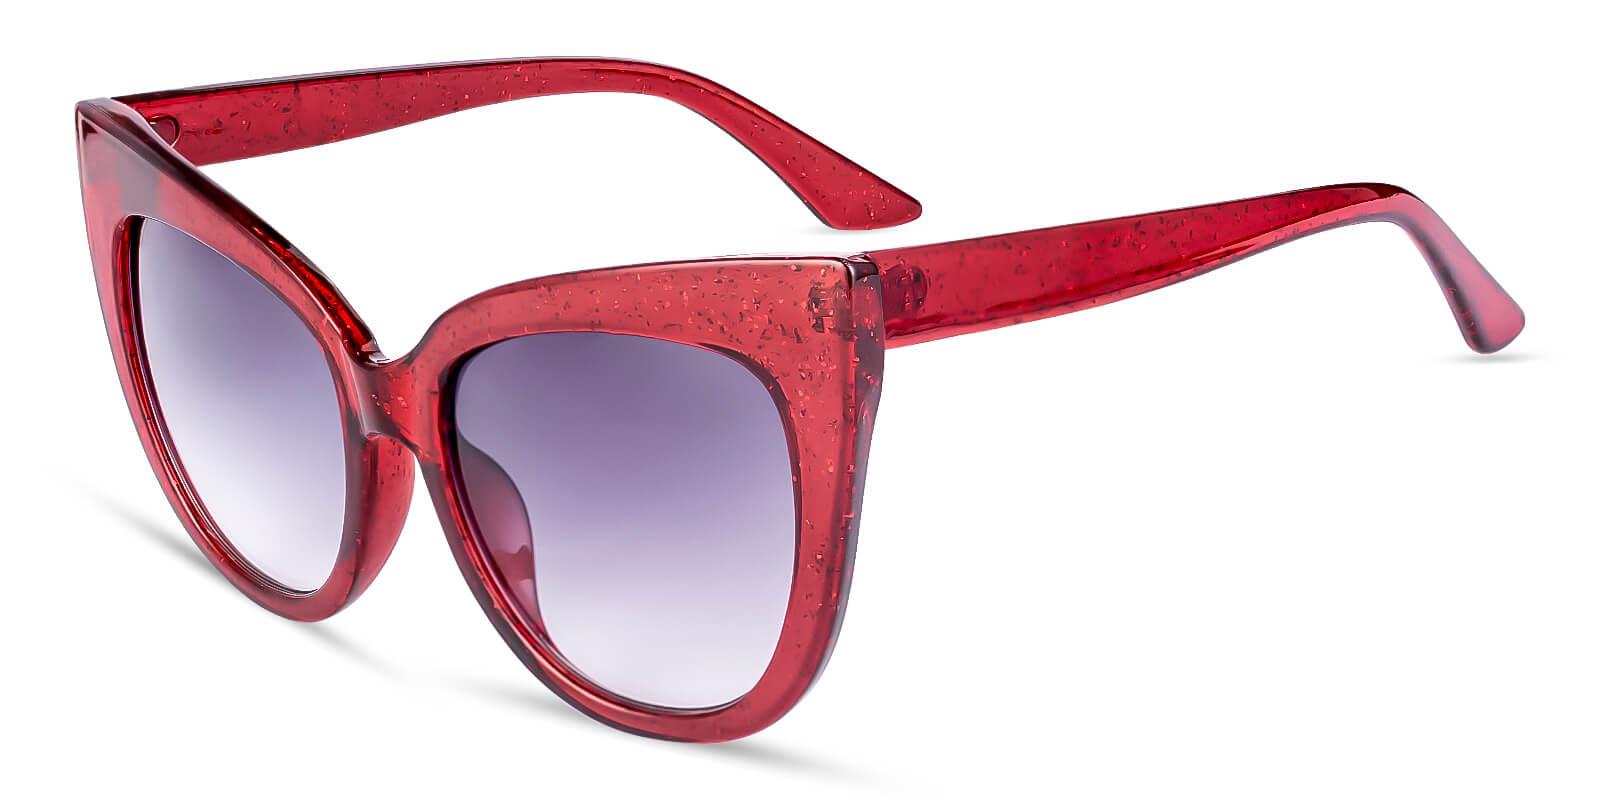 Daikon Red Plastic Fashion , Sunglasses Frames from ABBE Glasses